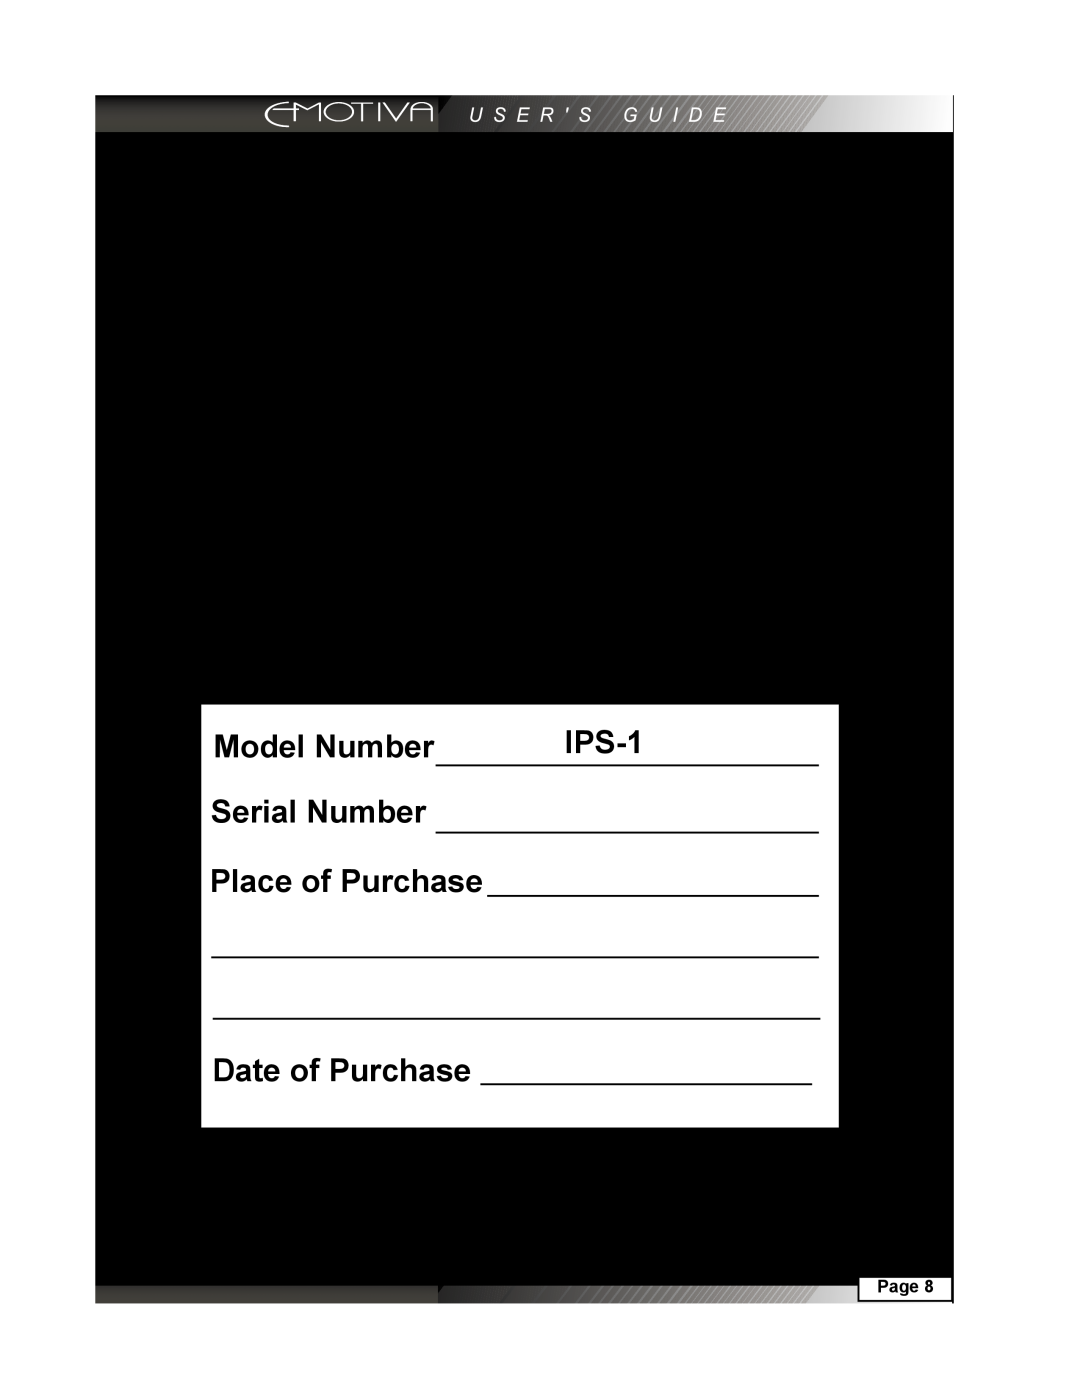 Emotiva manual Unpacking the IPS-1, Recording the Serial Number, Model Number, Place of Purchase, Date of Purchase 